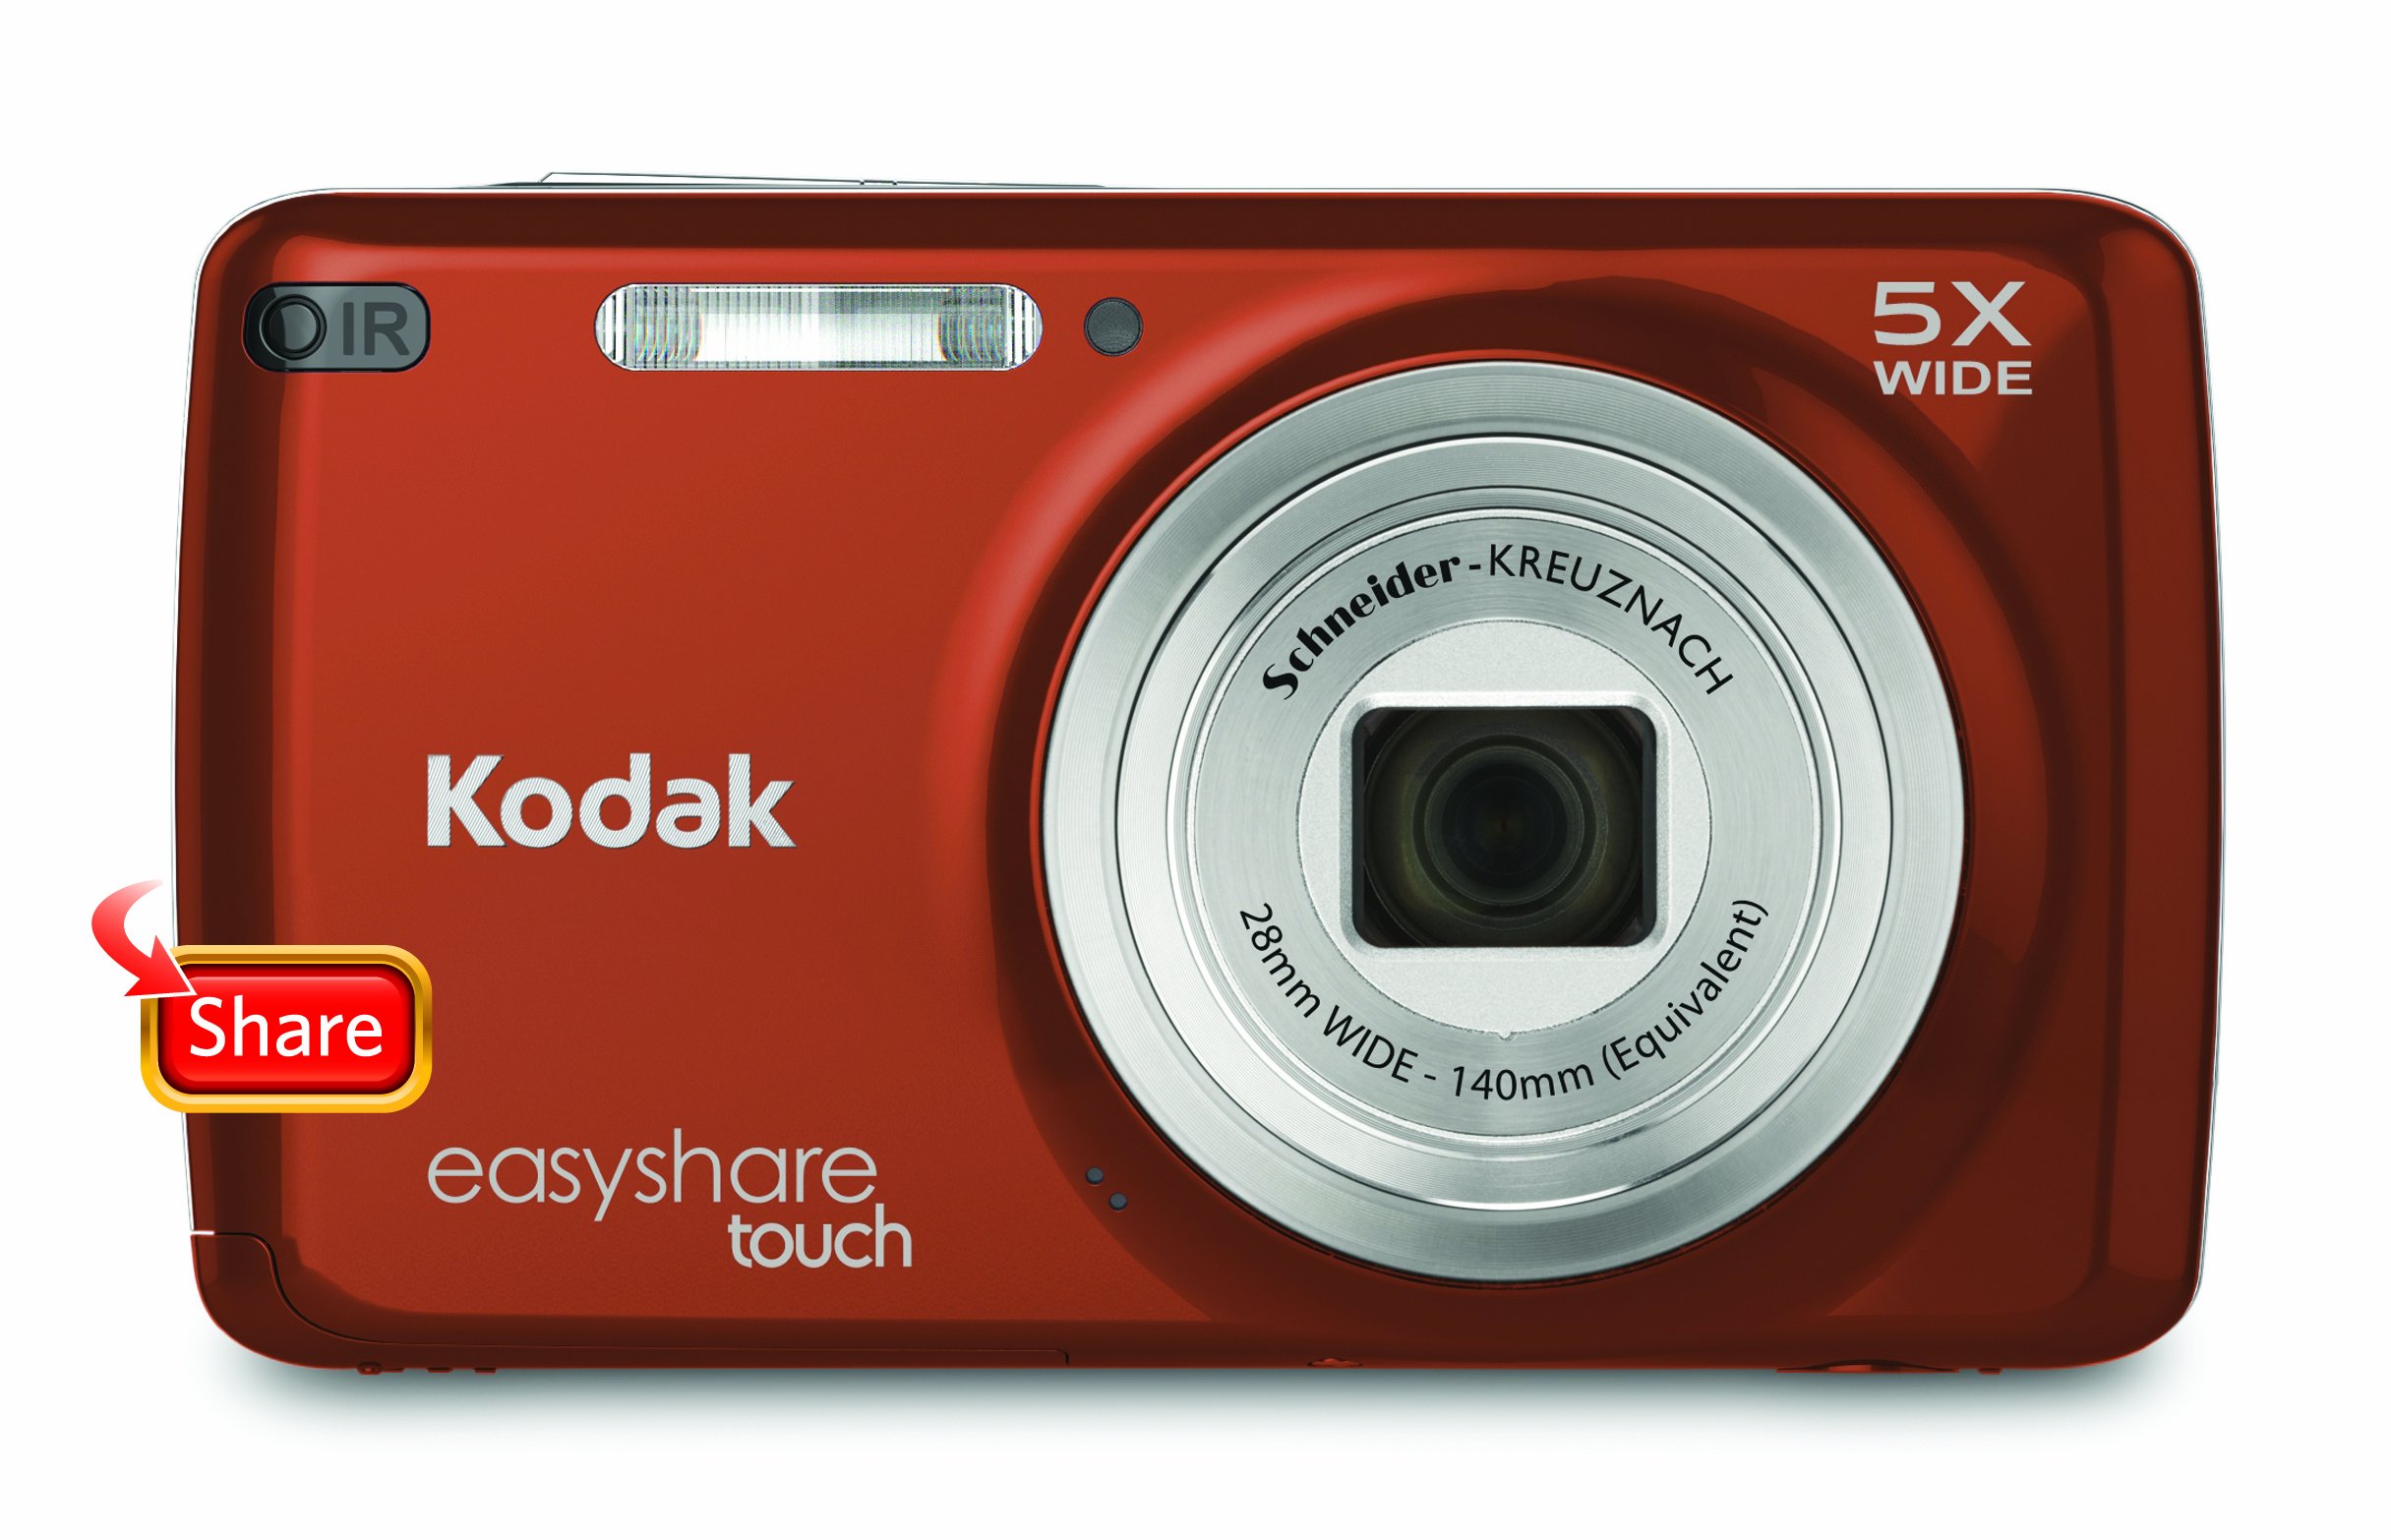 Kodak EasyShare Touch M577 14 MP Digital Camera with 5x Optical Zoom and 3-Inch LCD Touchscreen - RedOrange